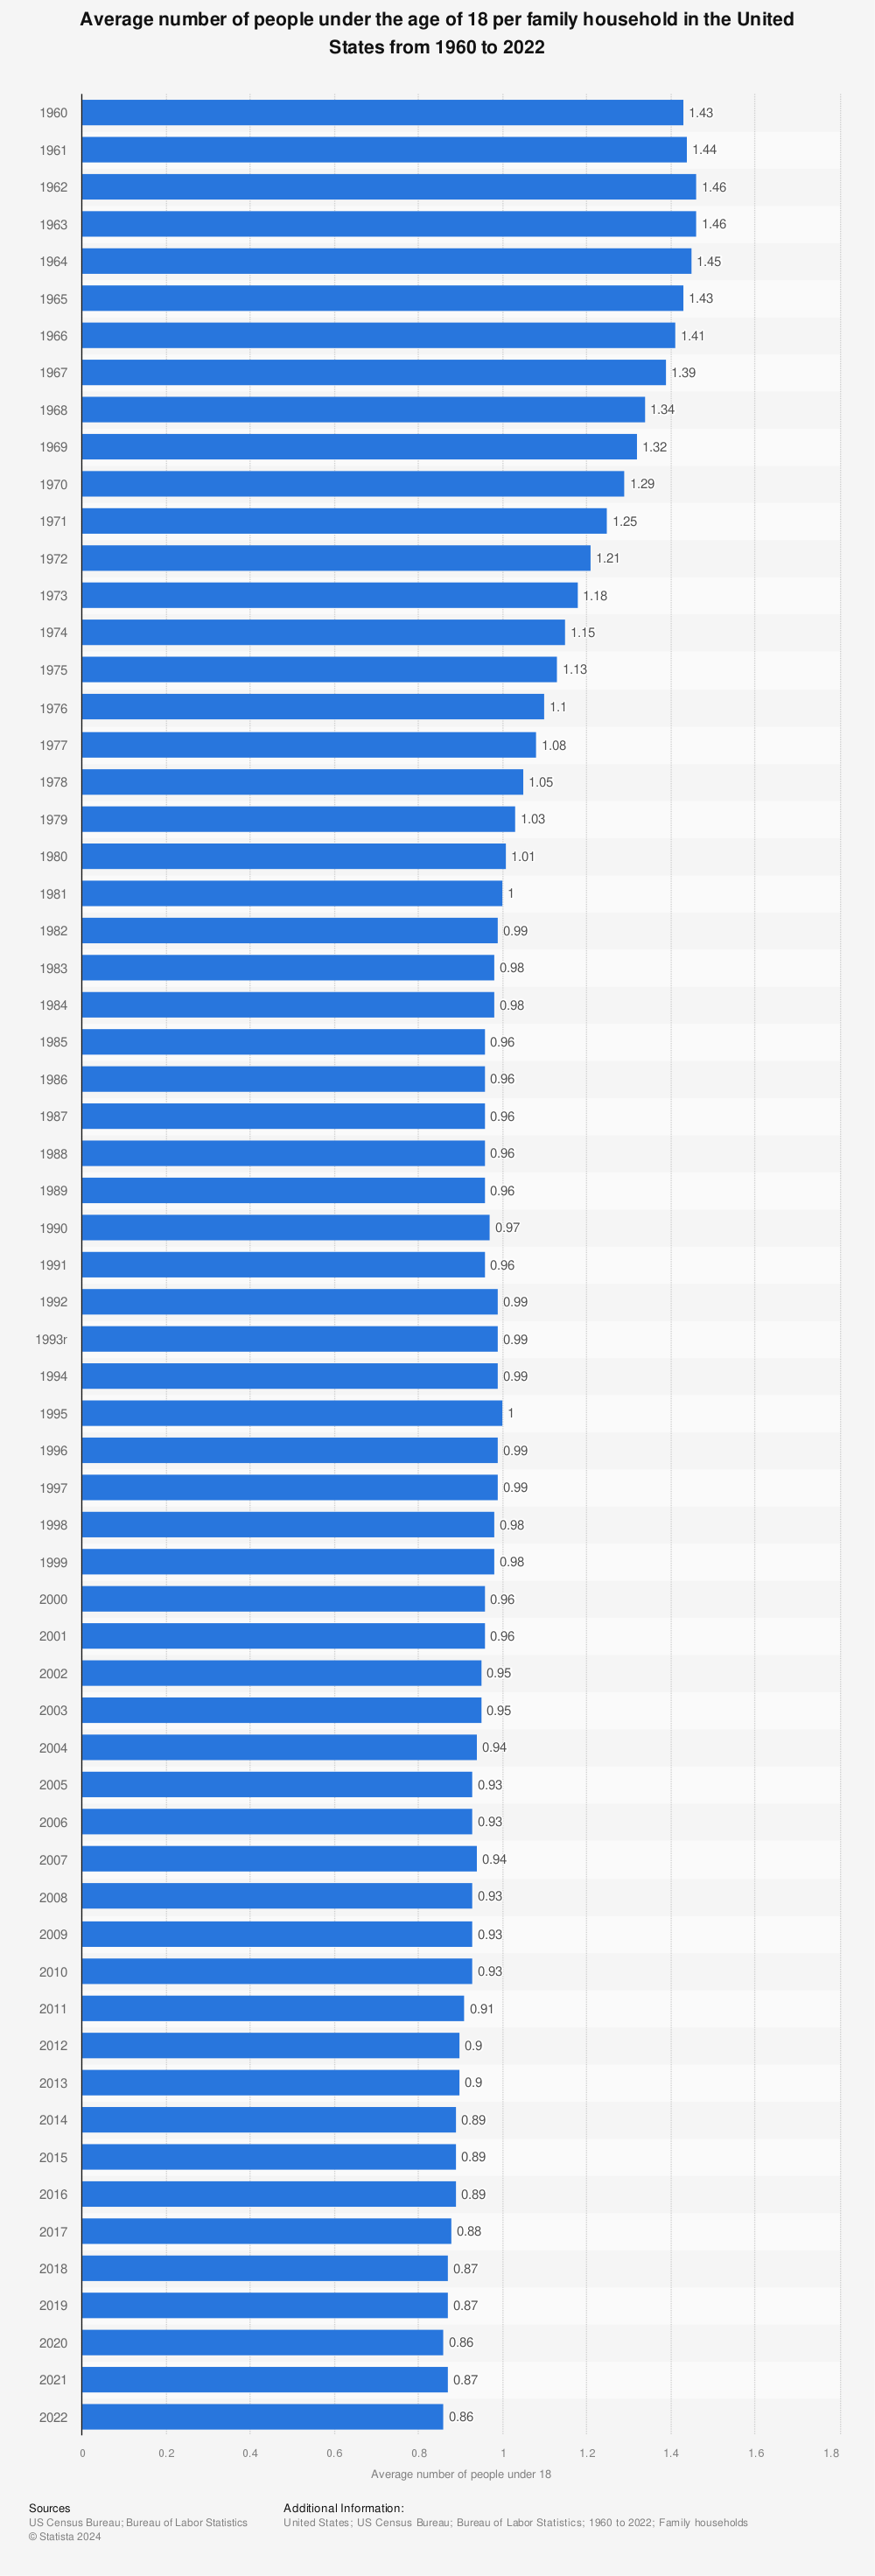 Statistic: Average number of people under the age of 18 per family household in the United States from 1960 to 2020 | Statista